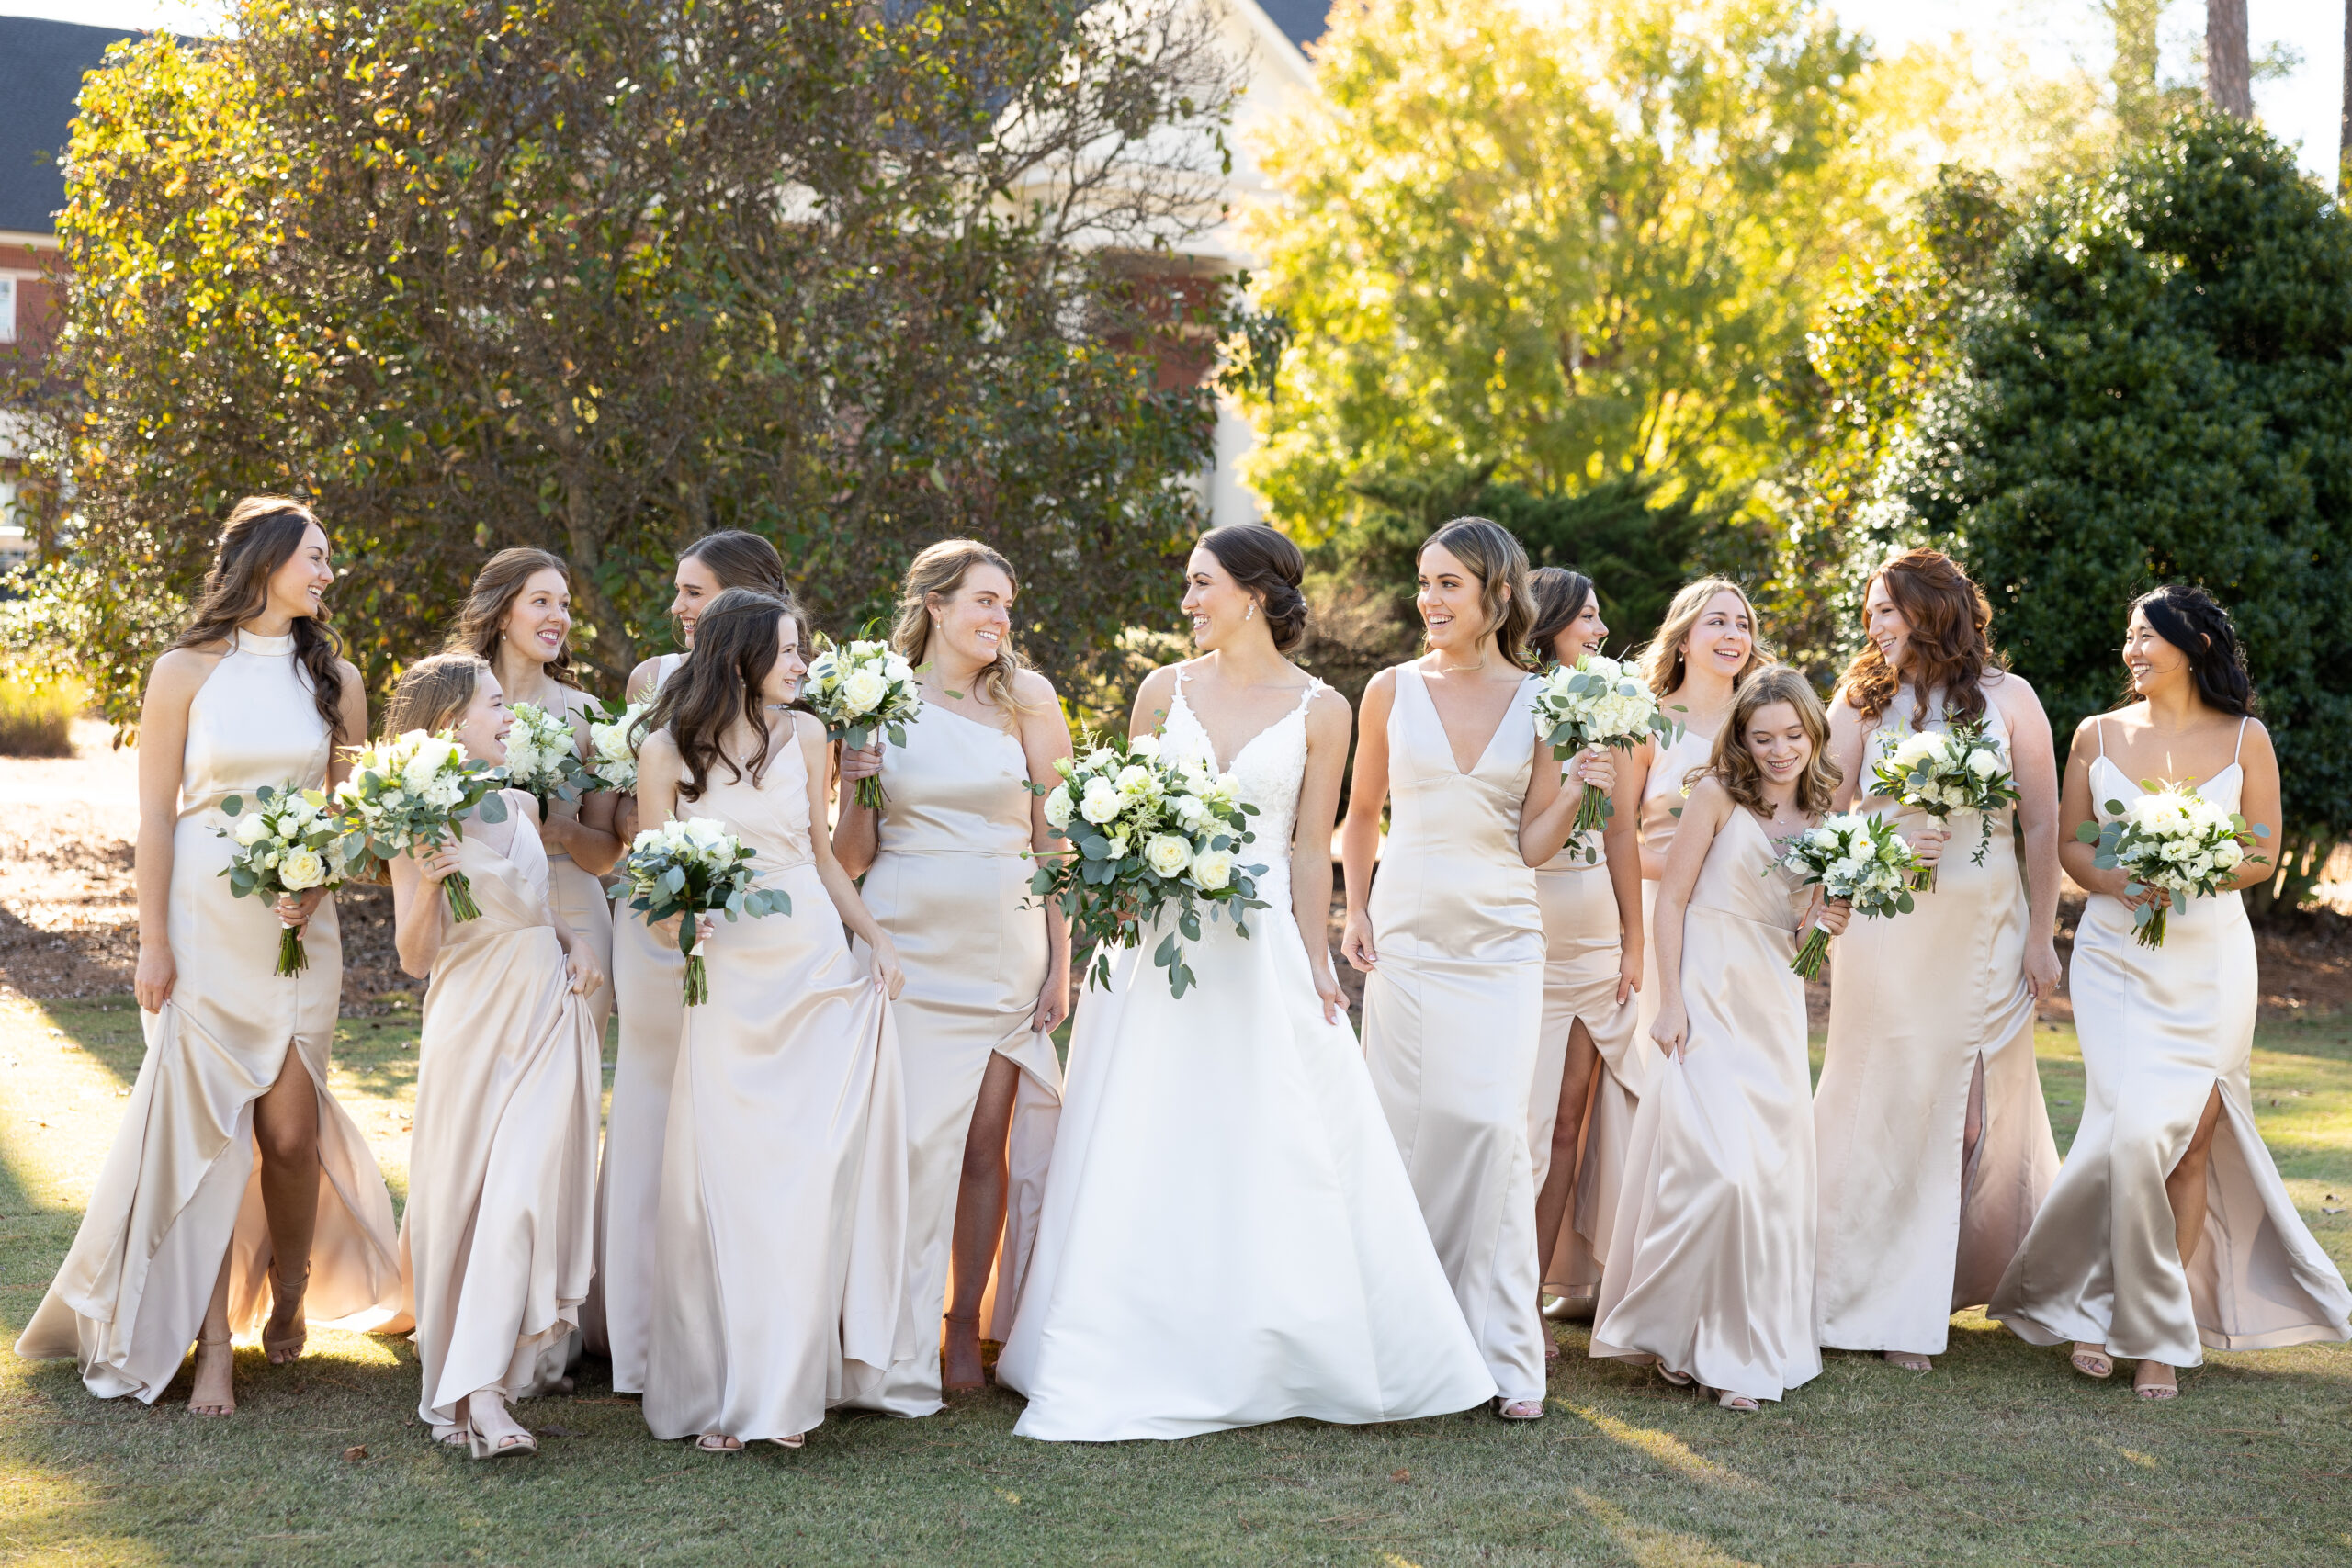 Bride in elegant white plunging v neck wedding dress walking with bridesmaids in champagne bridesmaid dresses over golf course in Durham NC